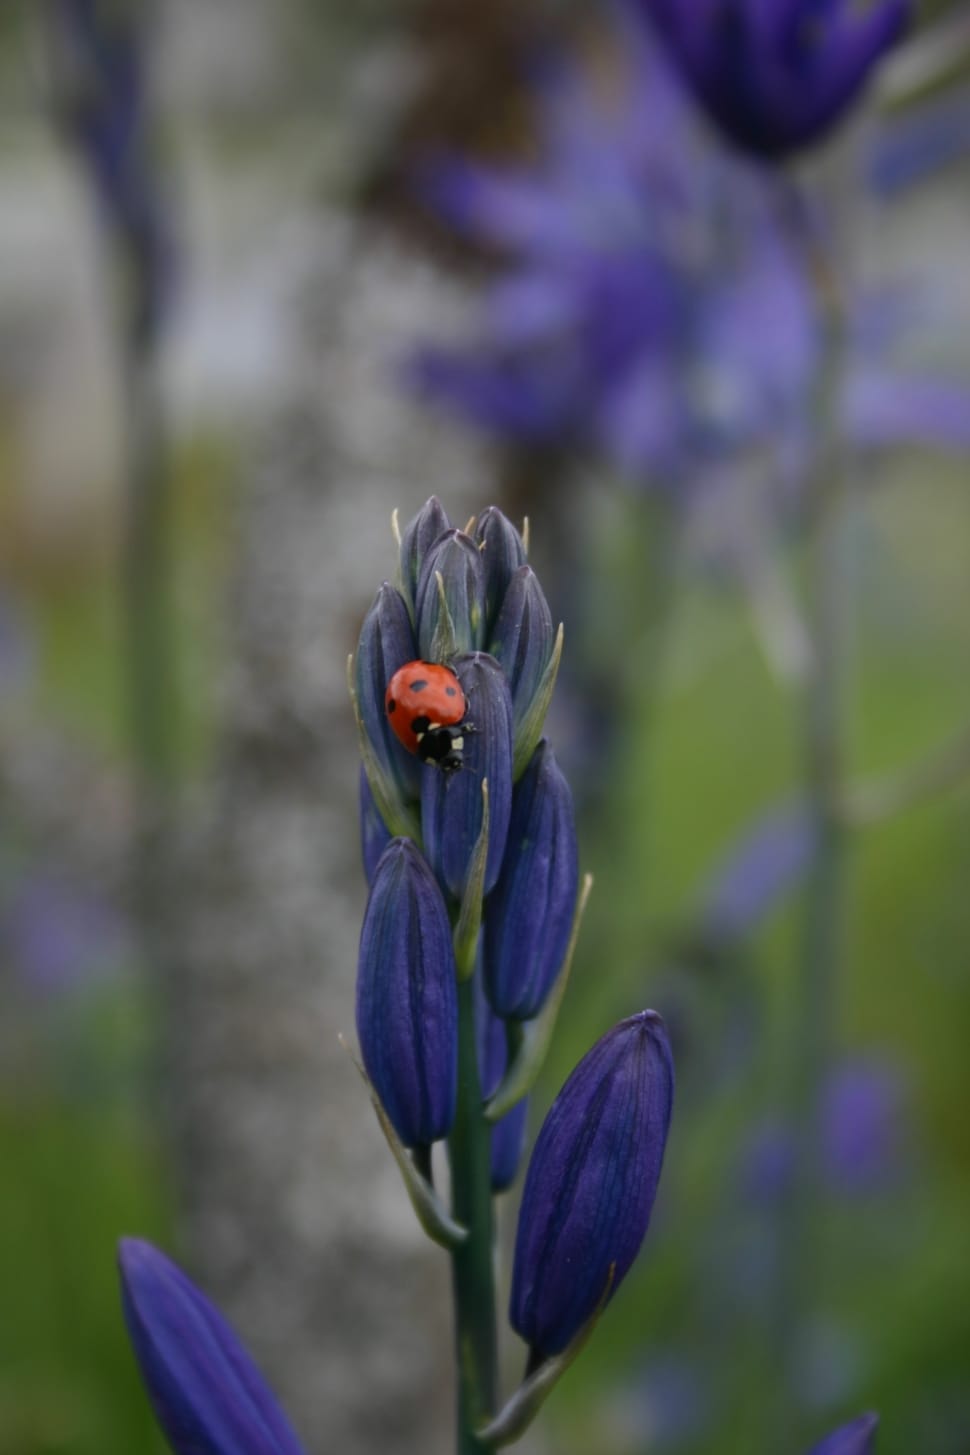 spotted ladybug and purple petaled flower preview